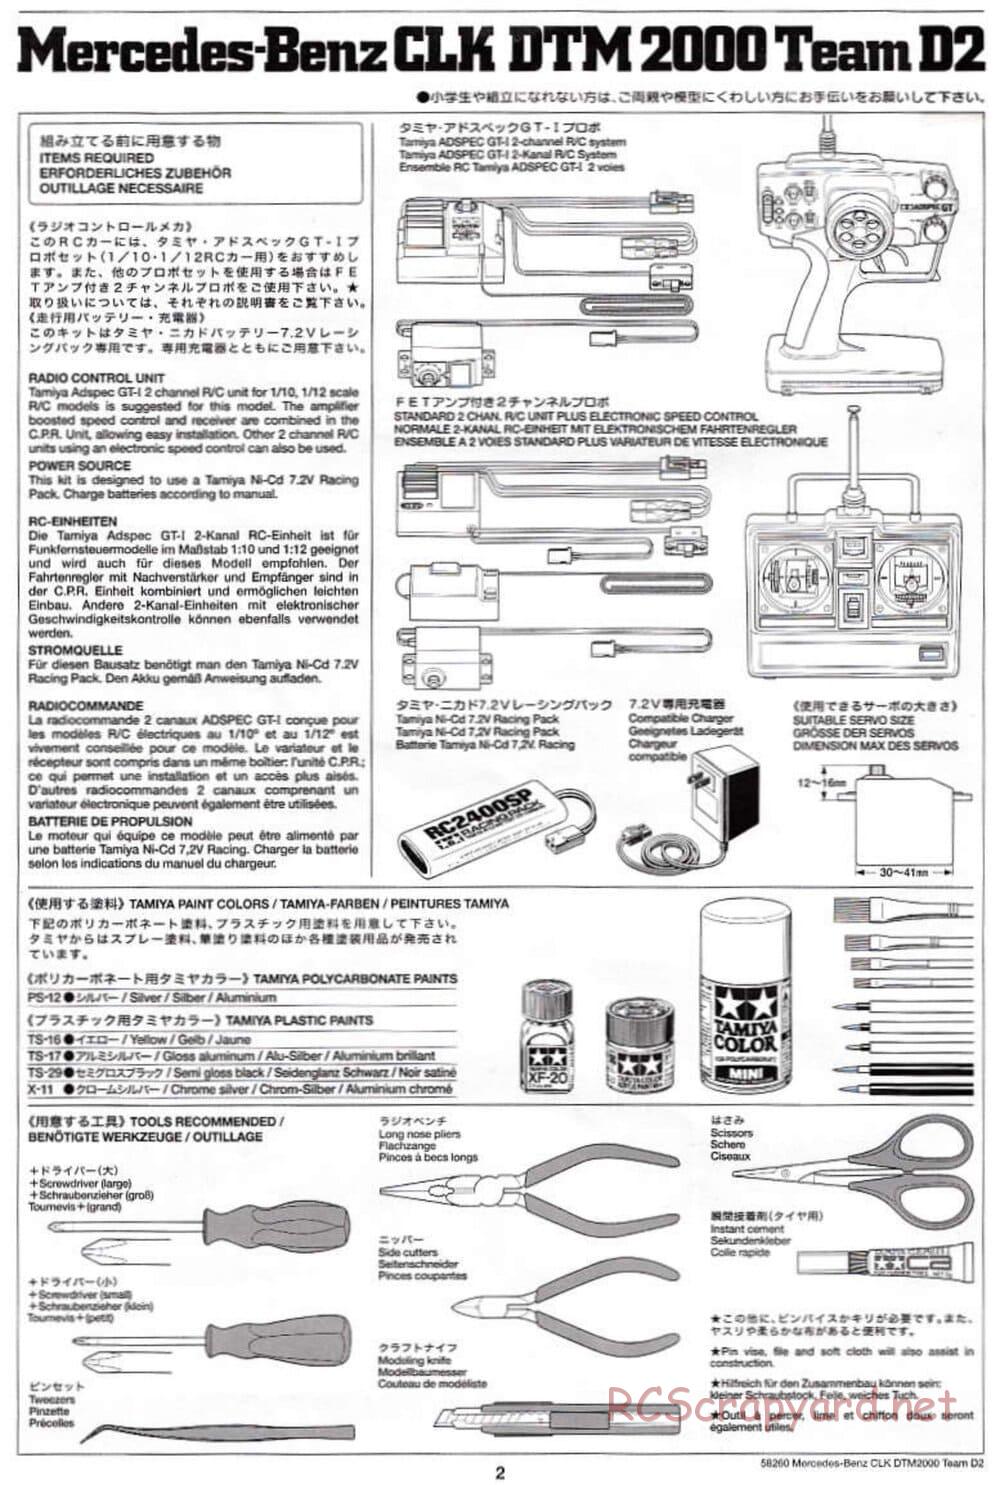 Tamiya - Mercedes Benz CLK DTM 2000 Team D2 - TL-01 Chassis - Manual - Page 2